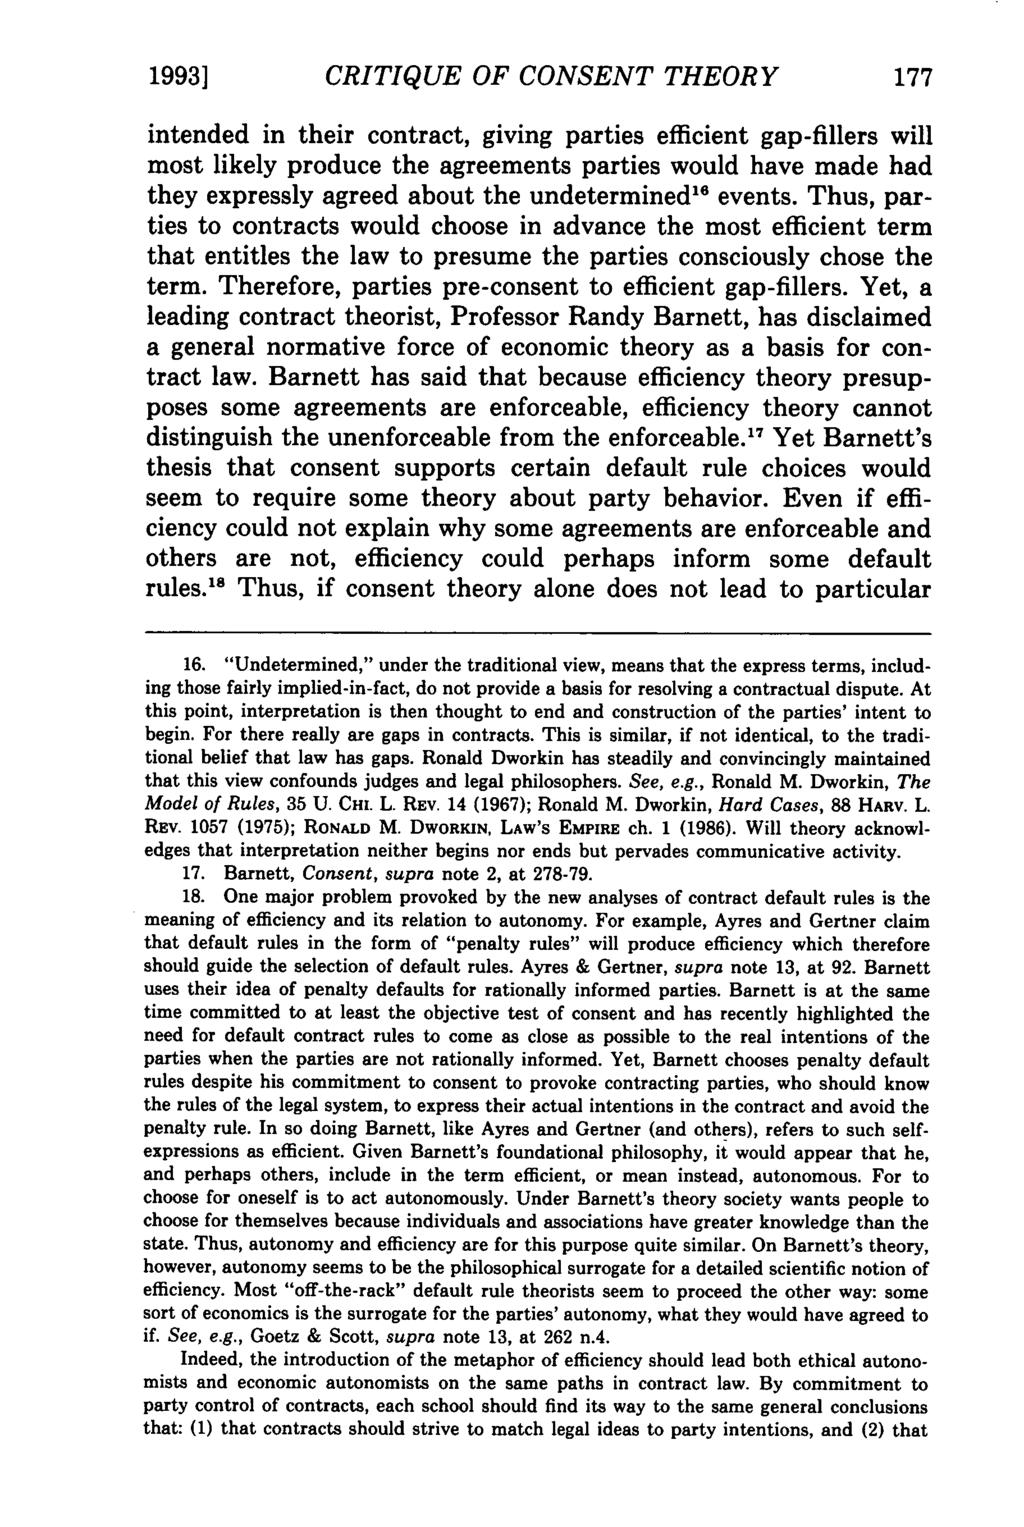 Kalevitch: Gaps in Contracts 1993] CRITIQUE OF CONSENT THEORY intended in their contract, giving parties efficient gap-fillers will most likely produce the agreements parties would have made had they